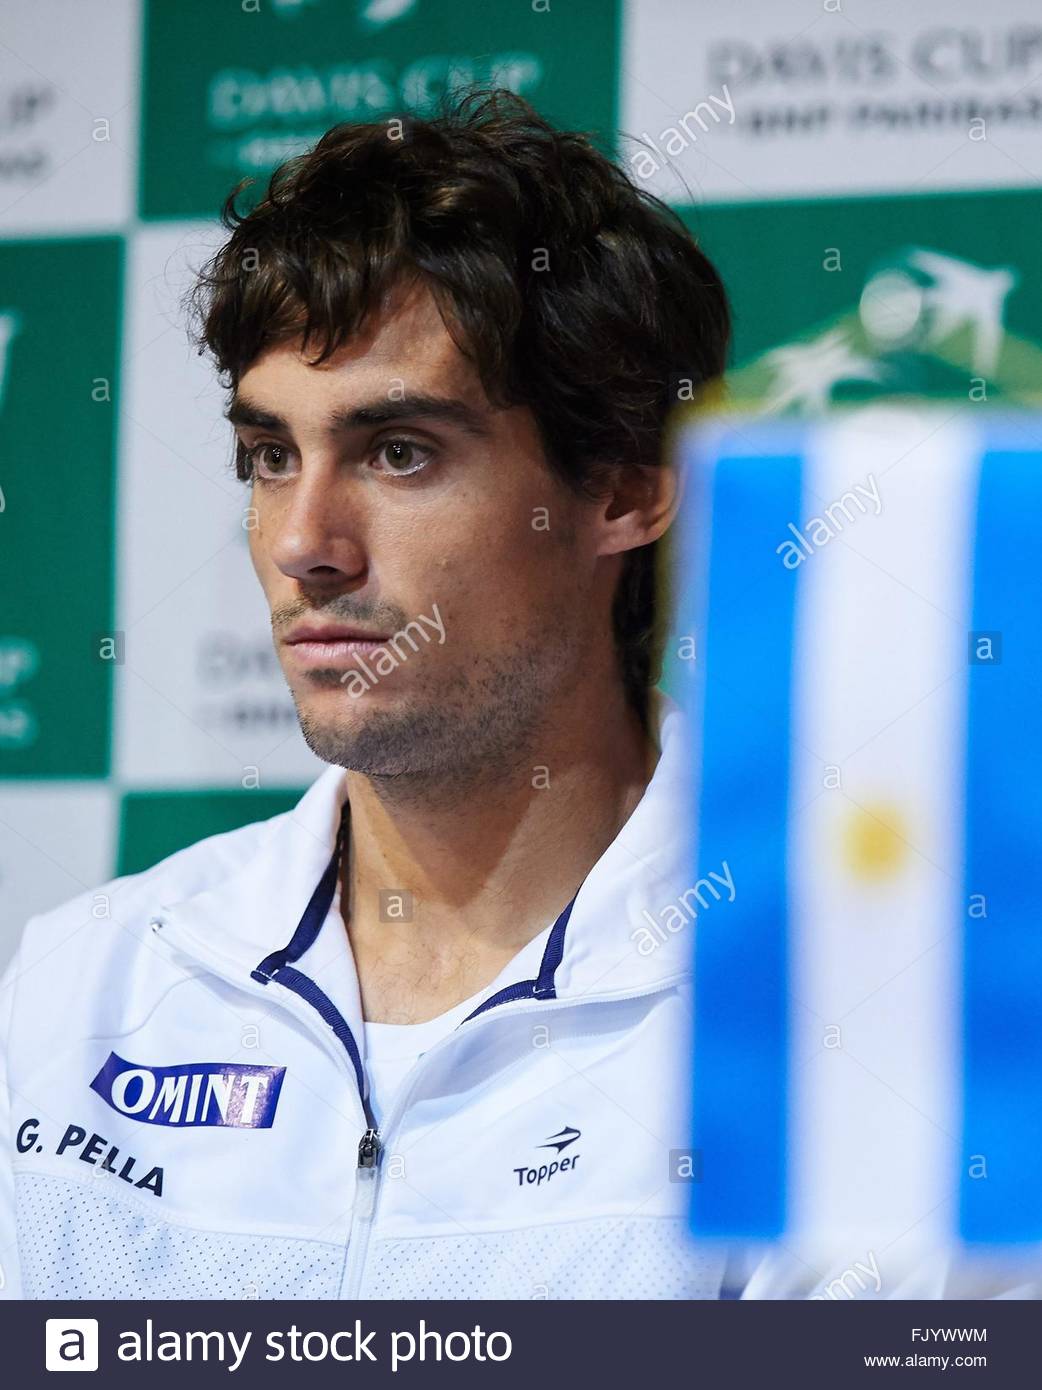 epa05188747-argentina-tennis-player-guido-pella-during-a-press-conference-FJYWWM.jpg